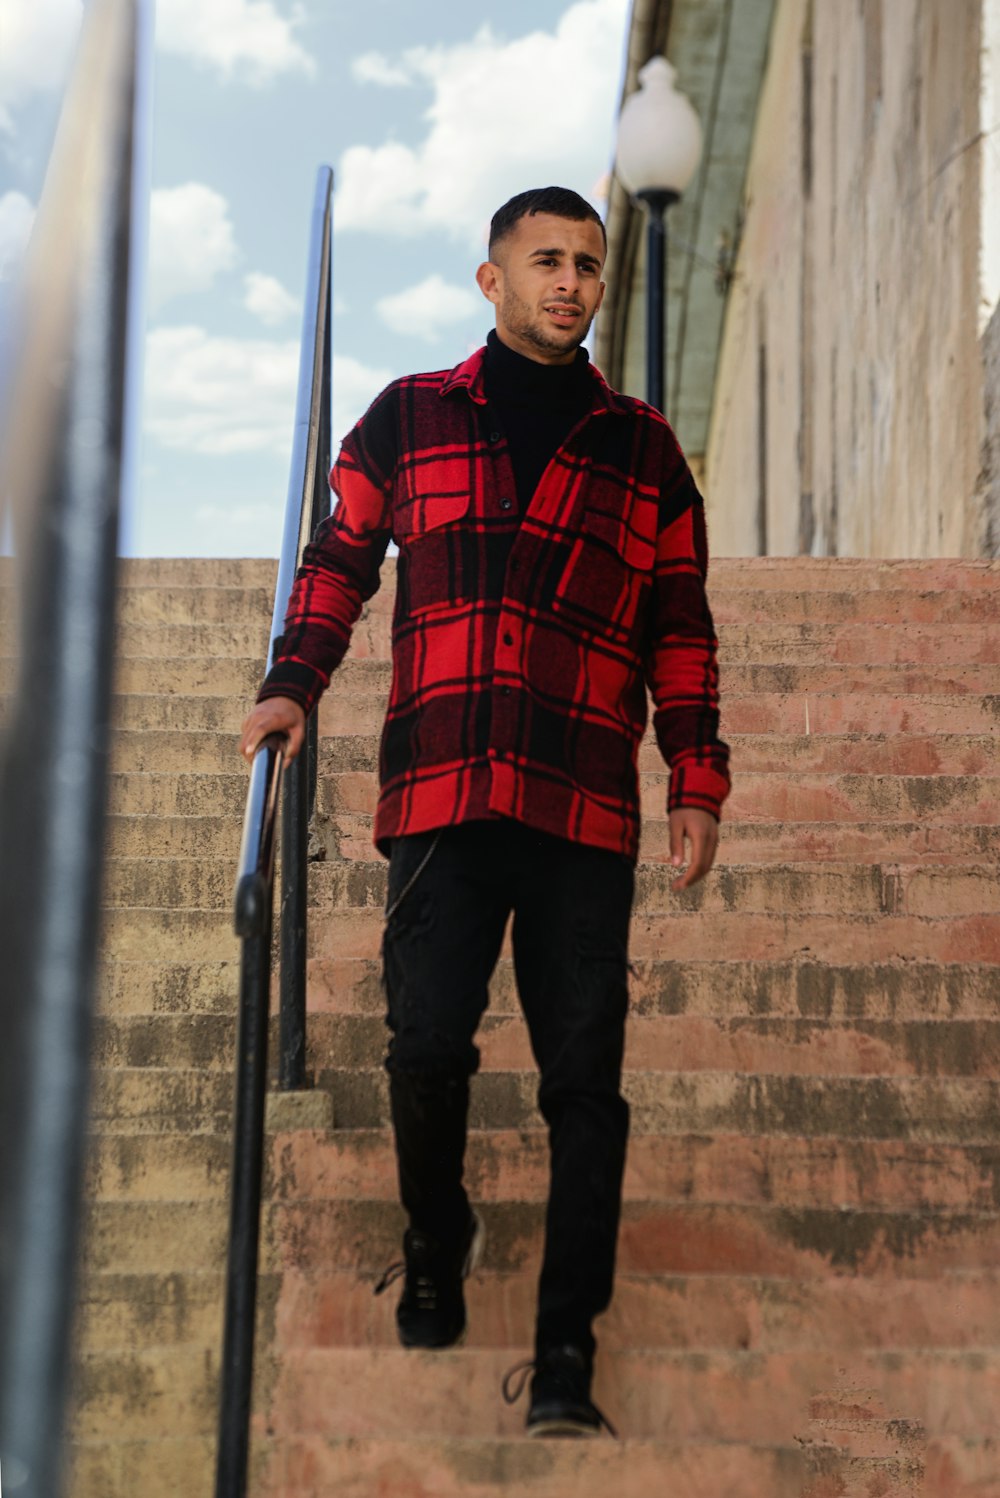 a man in a red and black jacket is walking up some stairs